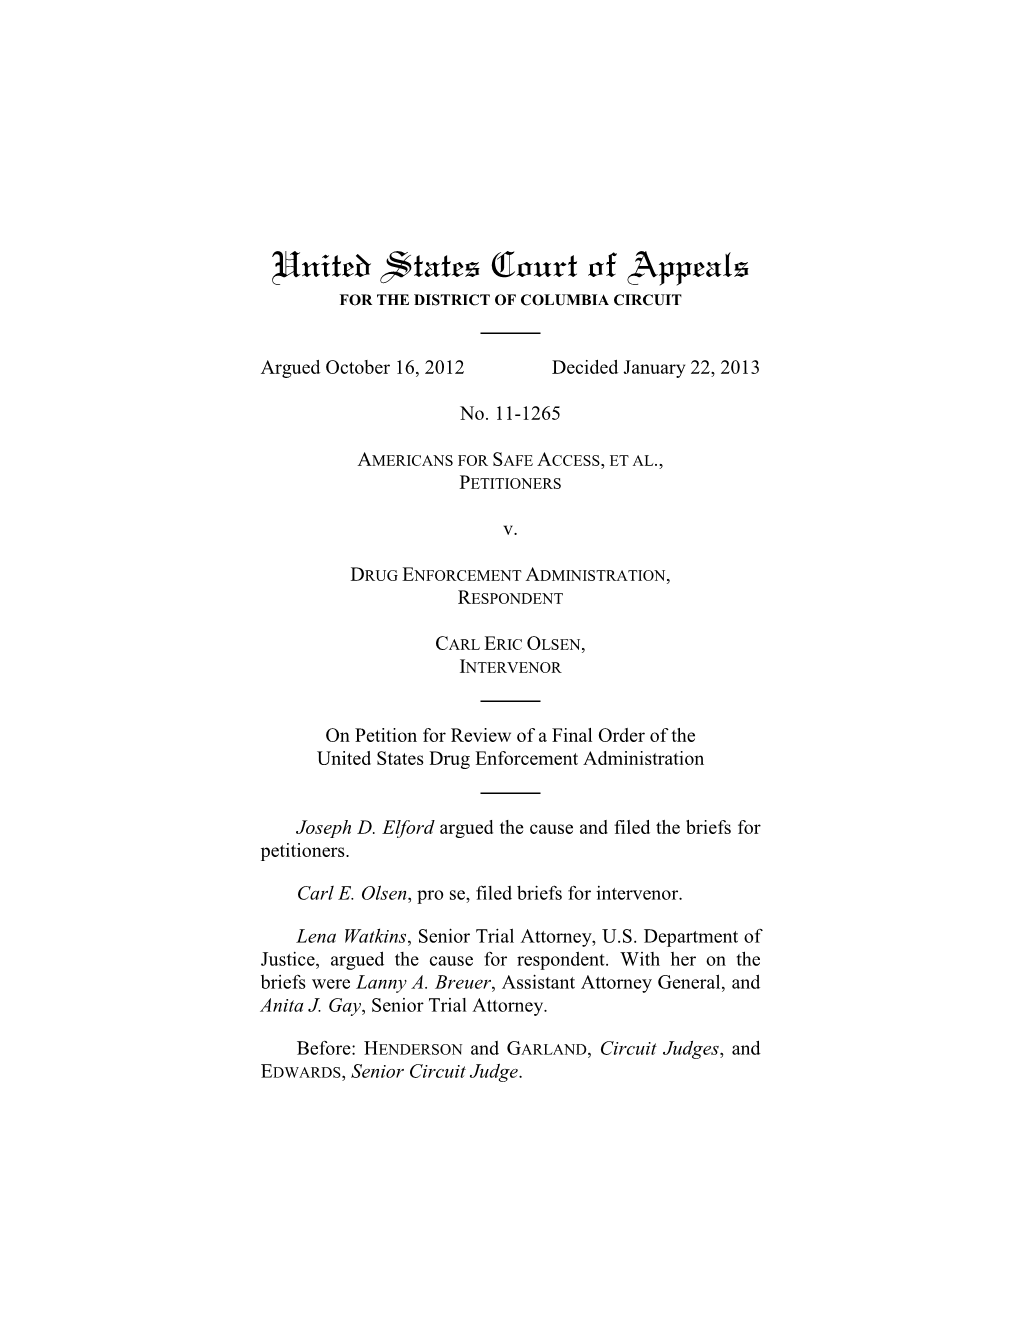 Opinion for the Court Filed by Senior Circuit Judge EDWARDS